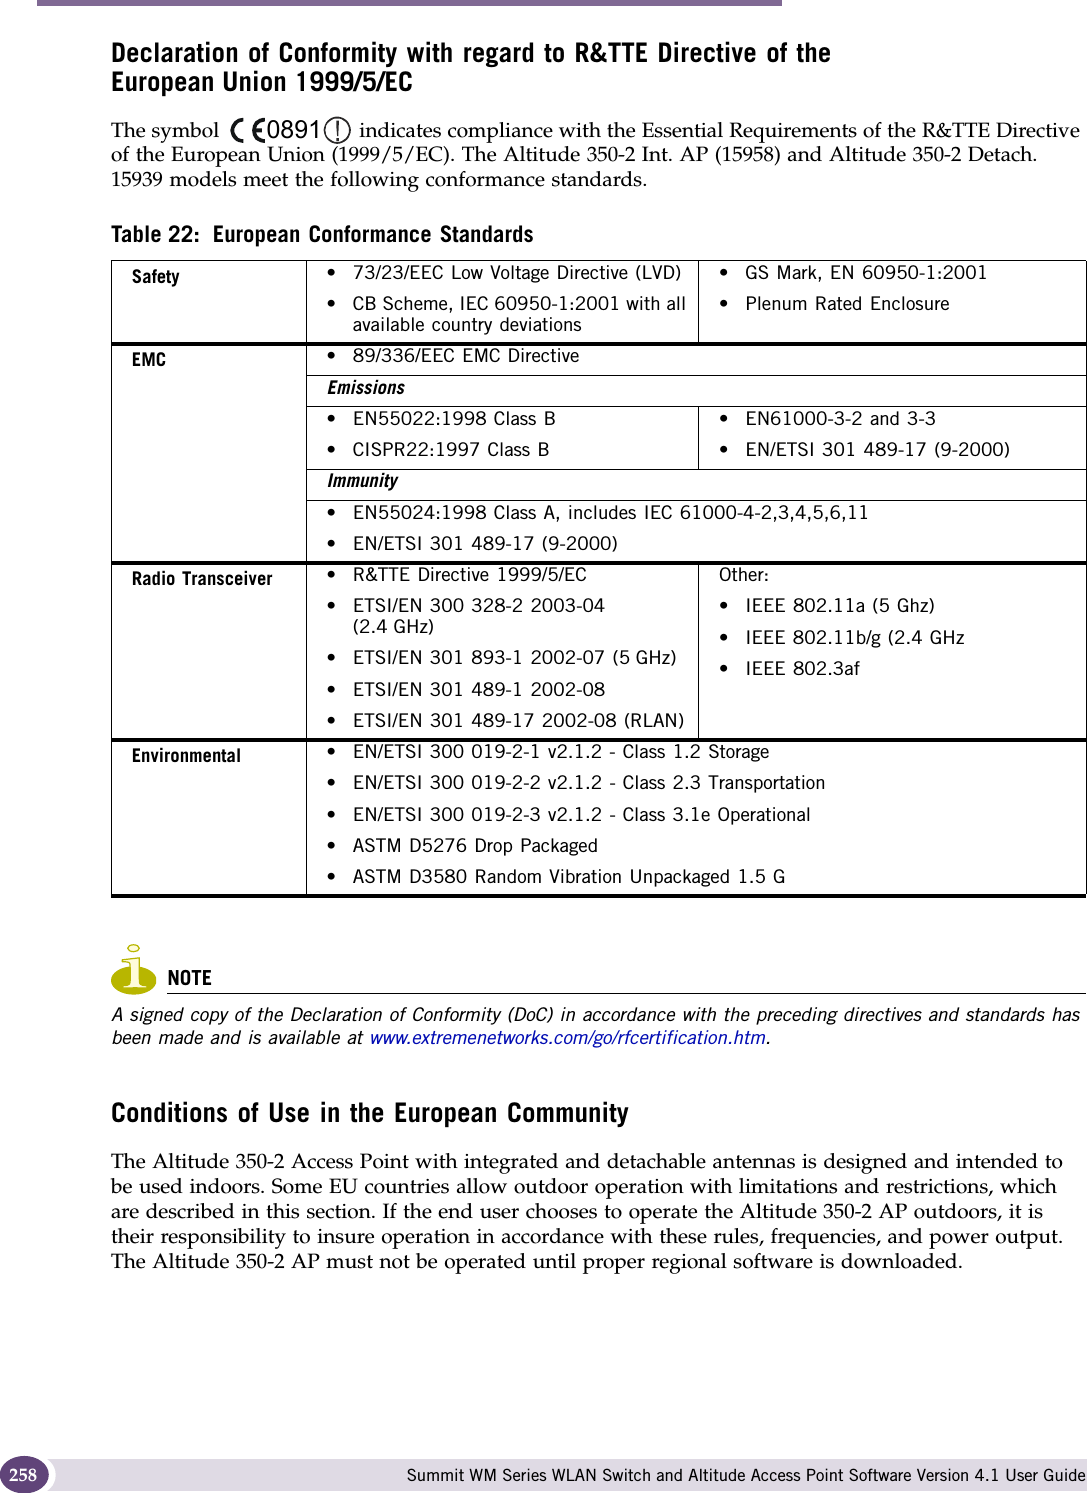 Regulatory Information Summit WM Series WLAN Switch and Altitude Access Point Software Version 4.1 User Guide258Declaration of Conformity with regard to R&amp;TTE Directive of the European Union 1999/5/EC The symbol   indicates compliance with the Essential Requirements of the R&amp;TTE Directive of the European Union (1999/5/EC). The Altitude 350-2 Int. AP (15958) and Altitude 350-2 Detach. 15939 models meet the following conformance standards.NOTEA signed copy of the Declaration of Conformity (DoC) in accordance with the preceding directives and standards has been made and is available at www.extremenetworks.com/go/rfcertification.htm.Conditions of Use in the European CommunityThe Altitude 350-2 Access Point with integrated and detachable antennas is designed and intended to be used indoors. Some EU countries allow outdoor operation with limitations and restrictions, which are described in this section. If the end user chooses to operate the Altitude 350-2 AP outdoors, it is their responsibility to insure operation in accordance with these rules, frequencies, and power output. The Altitude 350-2 AP must not be operated until proper regional software is downloaded. Table 22: European Conformance StandardsSafety • 73/23/EEC Low Voltage Directive (LVD)• CB Scheme, IEC 60950-1:2001 with all available country deviations• GS Mark, EN 60950-1:2001• Plenum Rated EnclosureEMC • 89/336/EEC EMC DirectiveEmissions• EN55022:1998 Class B• CISPR22:1997 Class B• EN61000-3-2 and 3-3• EN/ETSI 301 489-17 (9-2000)Immunity• EN55024:1998 Class A, includes IEC 61000-4-2,3,4,5,6,11• EN/ETSI 301 489-17 (9-2000)Radio Transceiver • R&amp;TTE Directive 1999/5/EC• ETSI/EN 300 328-2 2003-04 (2.4 GHz)• ETSI/EN 301 893-1 2002-07 (5 GHz)• ETSI/EN 301 489-1 2002-08• ETSI/EN 301 489-17 2002-08 (RLAN)Other:• IEEE 802.11a (5 Ghz)• IEEE 802.11b/g (2.4 GHz• IEEE 802.3afEnvironmental • EN/ETSI 300 019-2-1 v2.1.2 - Class 1.2 Storage• EN/ETSI 300 019-2-2 v2.1.2 - Class 2.3 Transportation• EN/ETSI 300 019-2-3 v2.1.2 - Class 3.1e Operational• ASTM D5276 Drop Packaged• ASTM D3580 Random Vibration Unpackaged 1.5 G0891